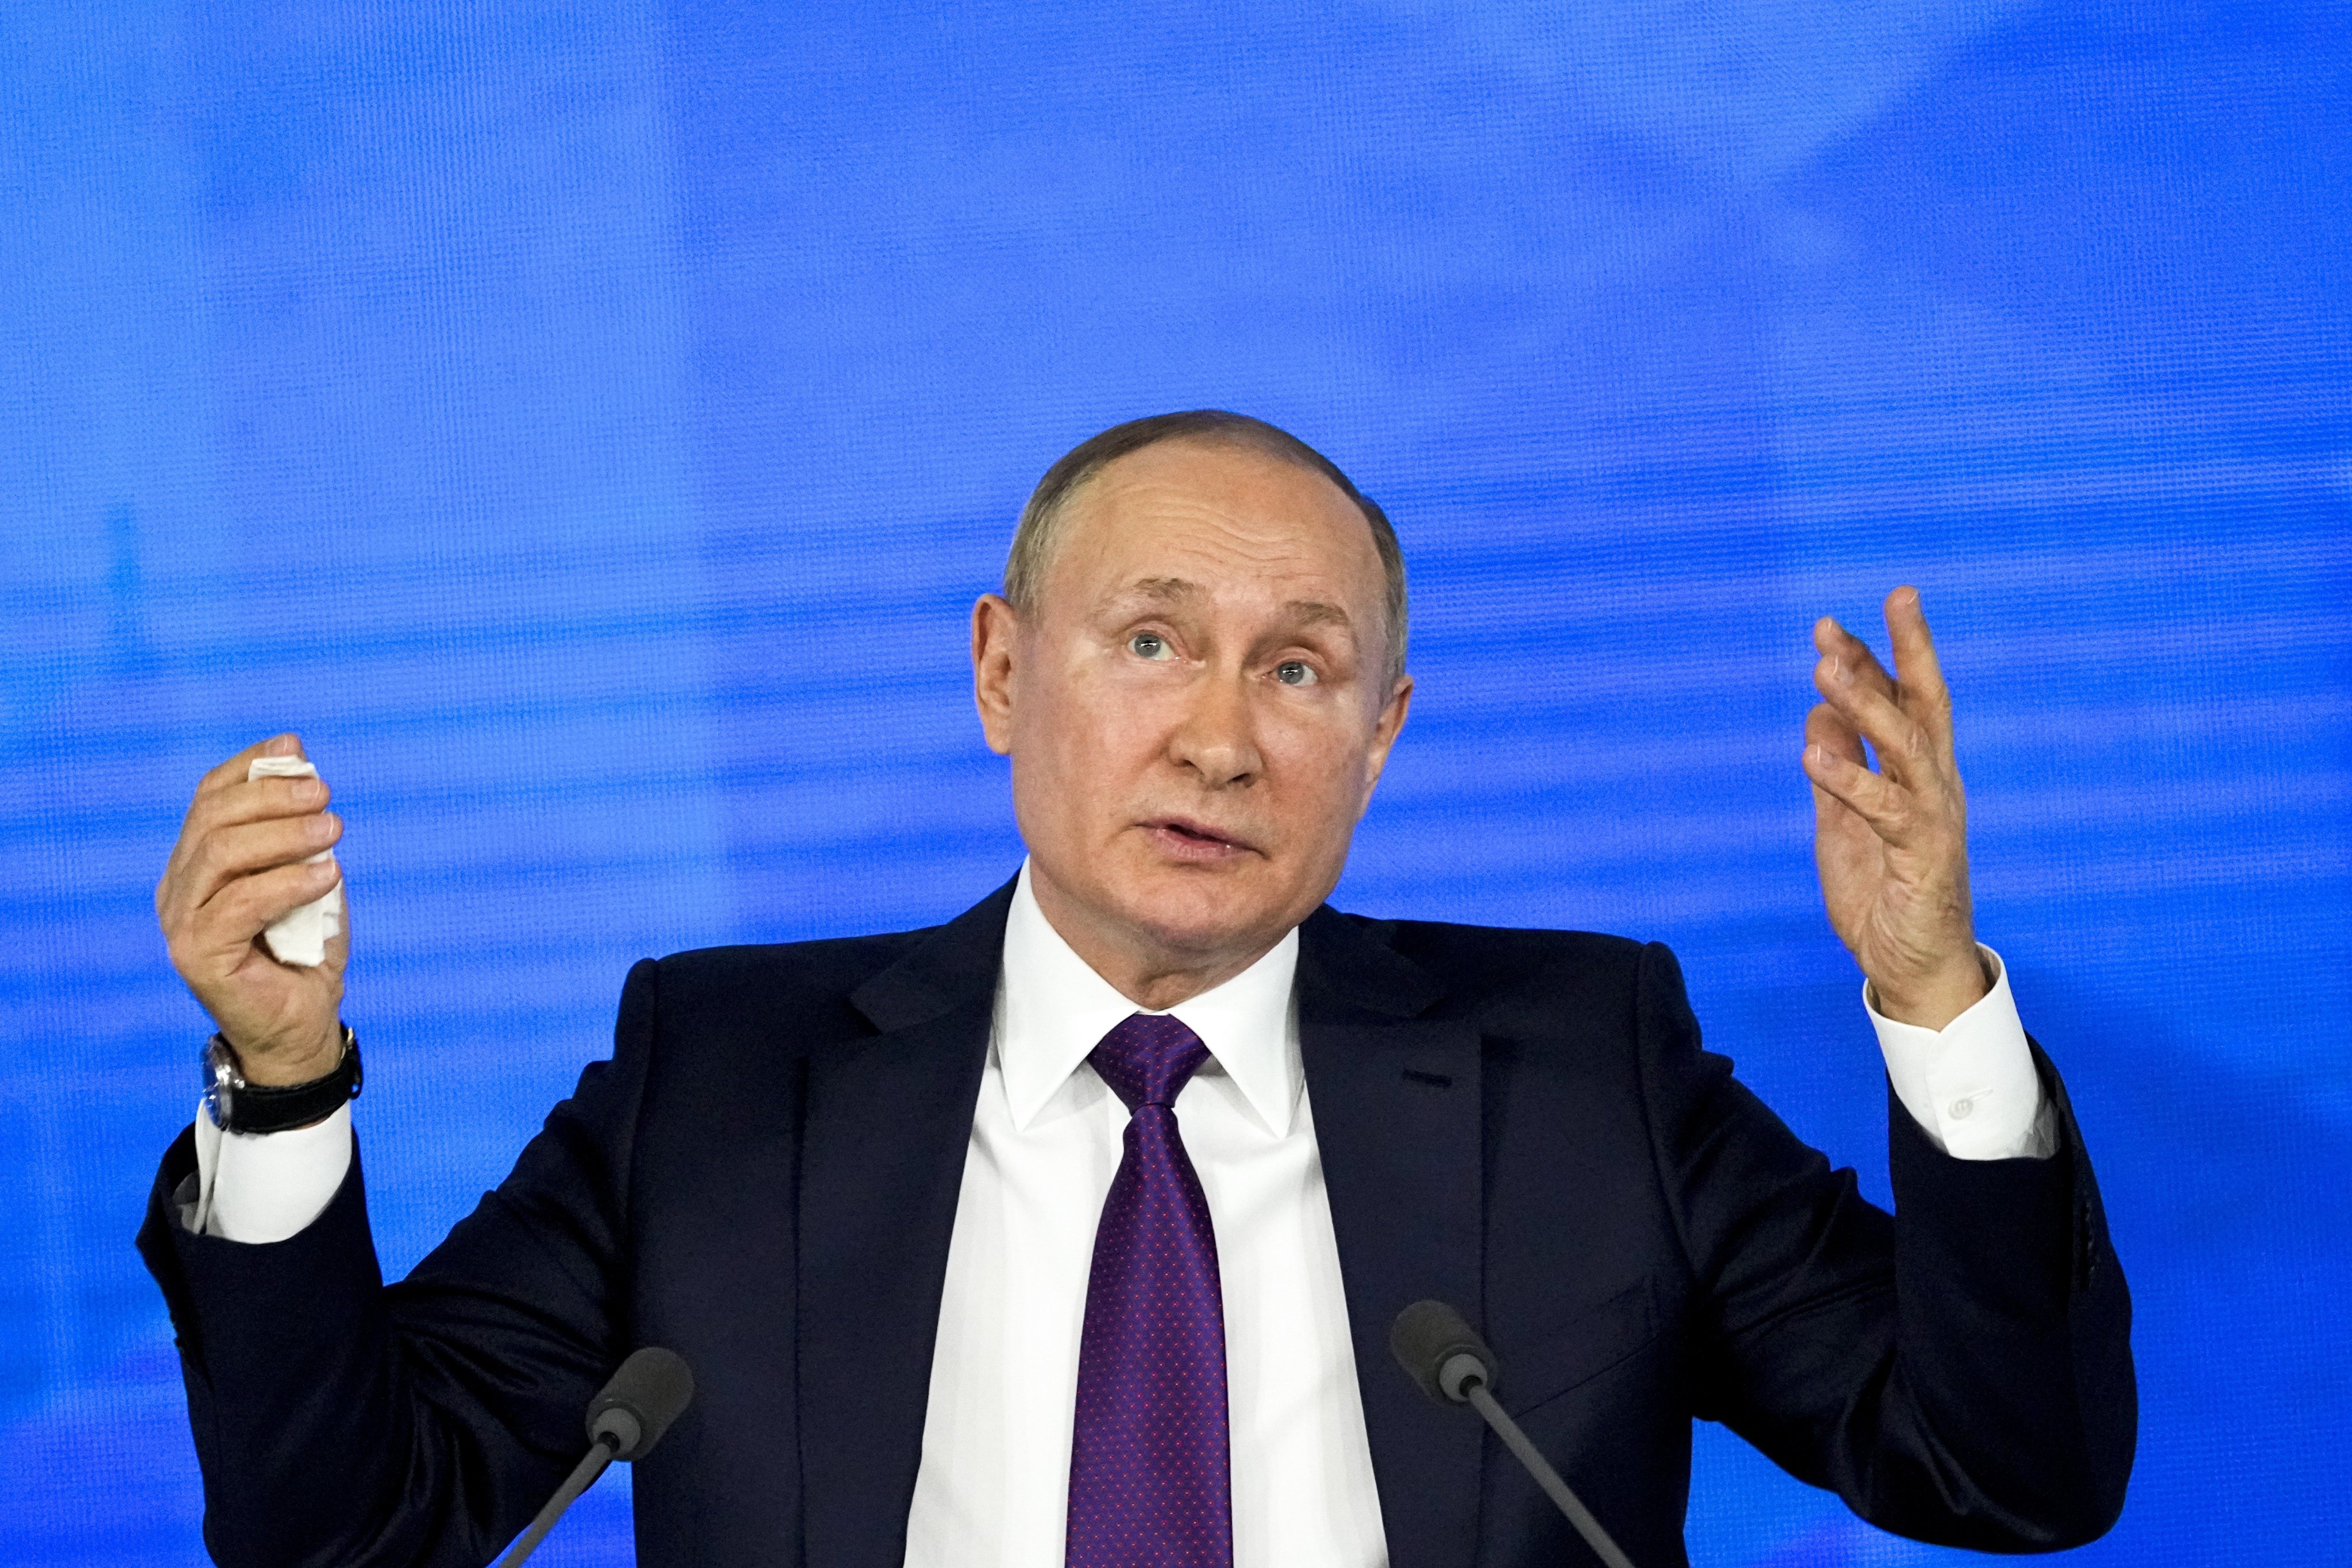 Russian President Vladimir Putin gestures during his annual news conference in Moscow on December 23. Putin’s insistence that Ukraine stay in Russia’s sphere of influence is shaped by a history of foreign invasion and a rejection of Ukrainian sovereignty. Photo: AP